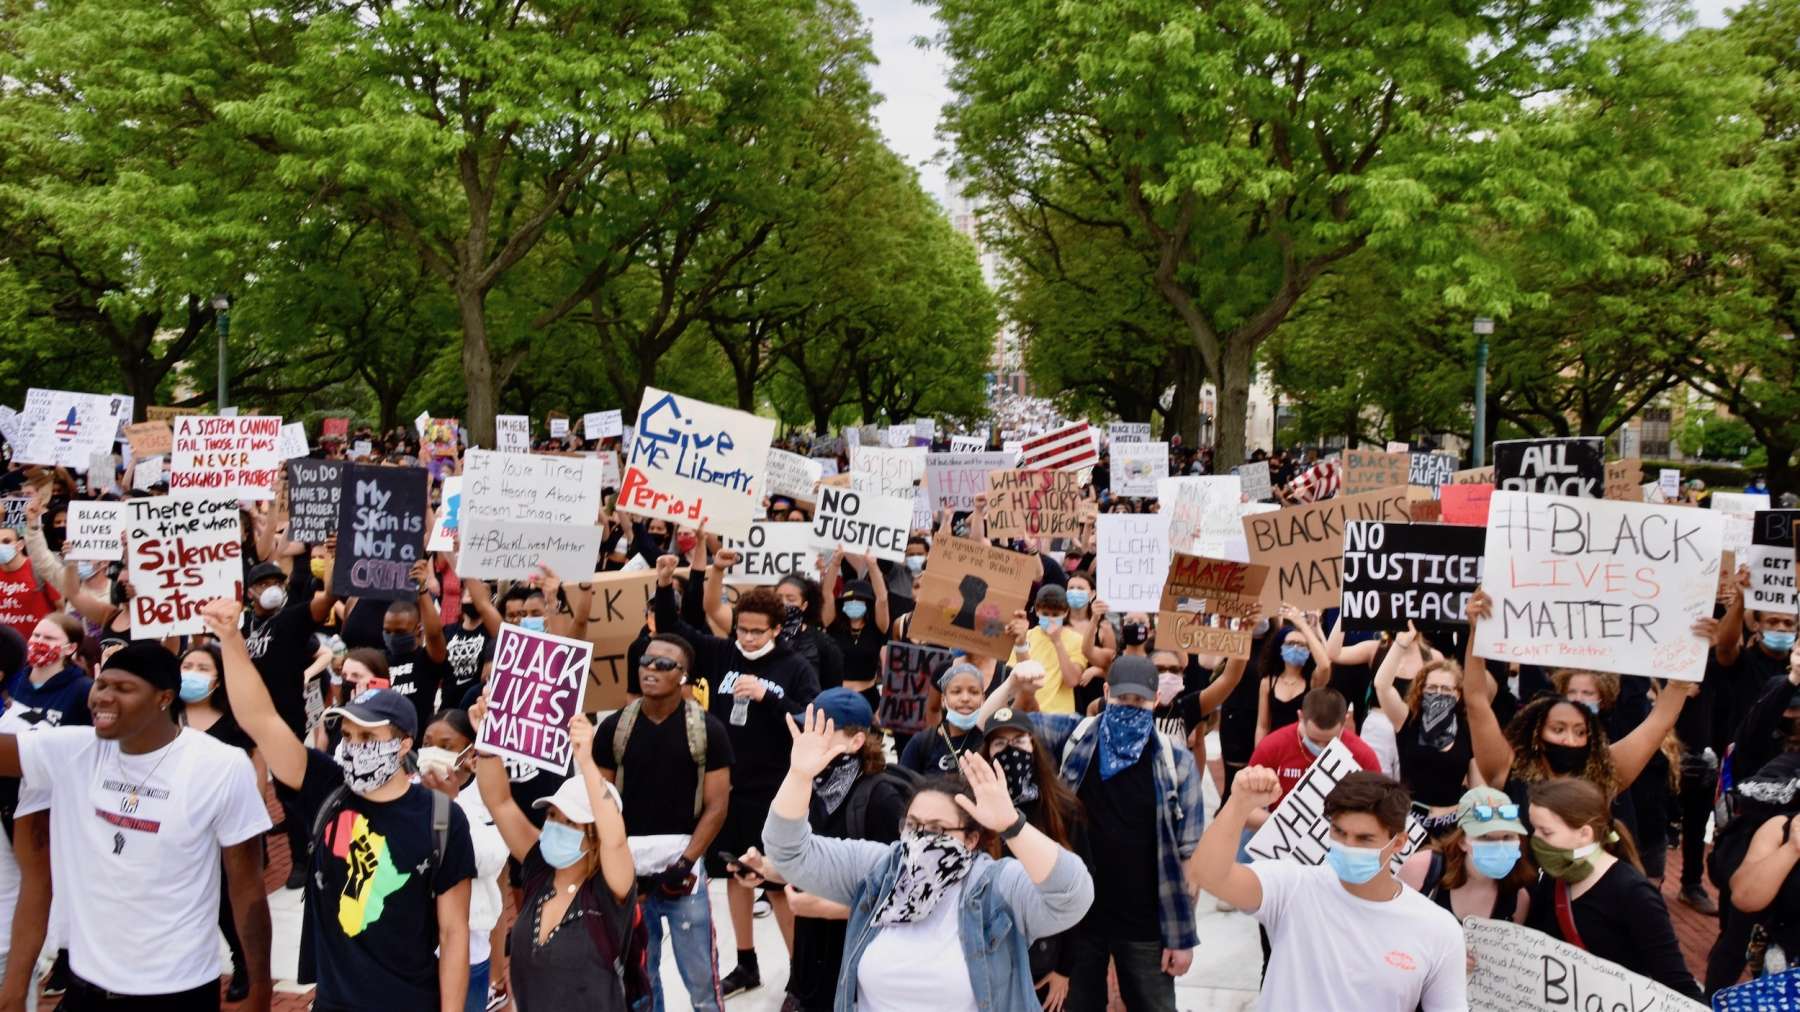 Rhode Island News: Thousands take to the streets of Providence in youth led Protect Black Lives protest